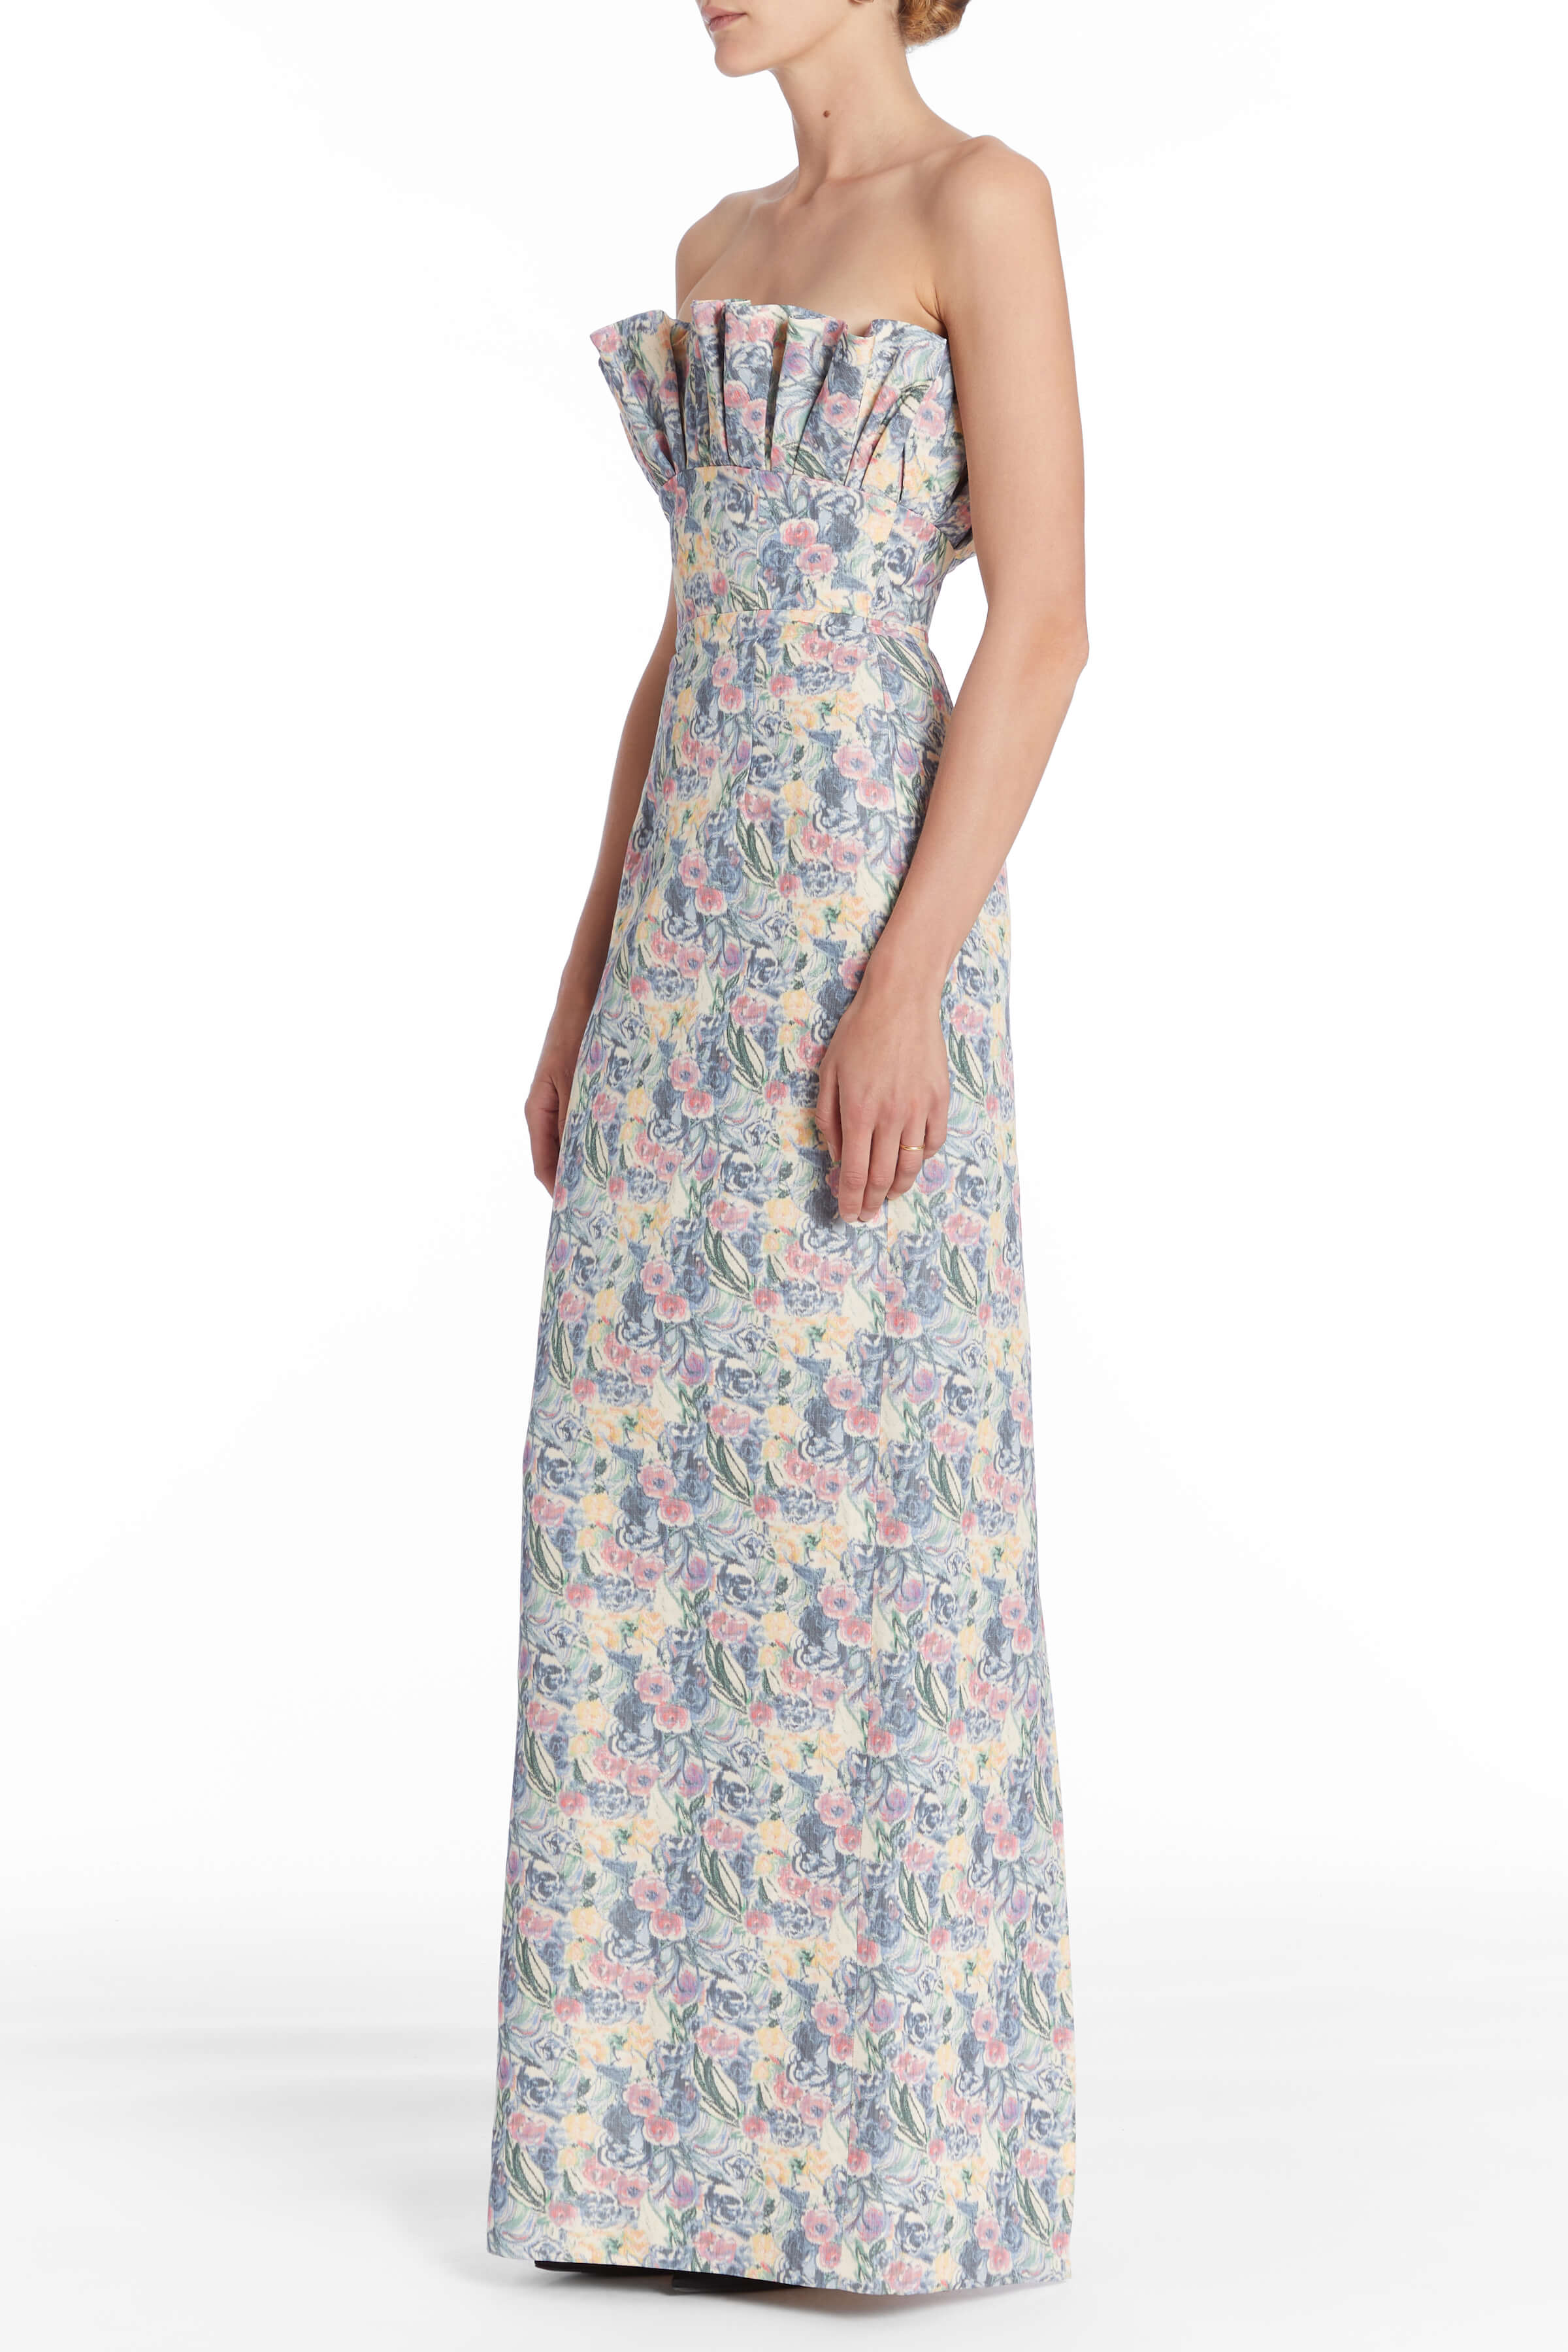 Demetra Sustainable Watercolor Floral Ruffled Bodice Gown